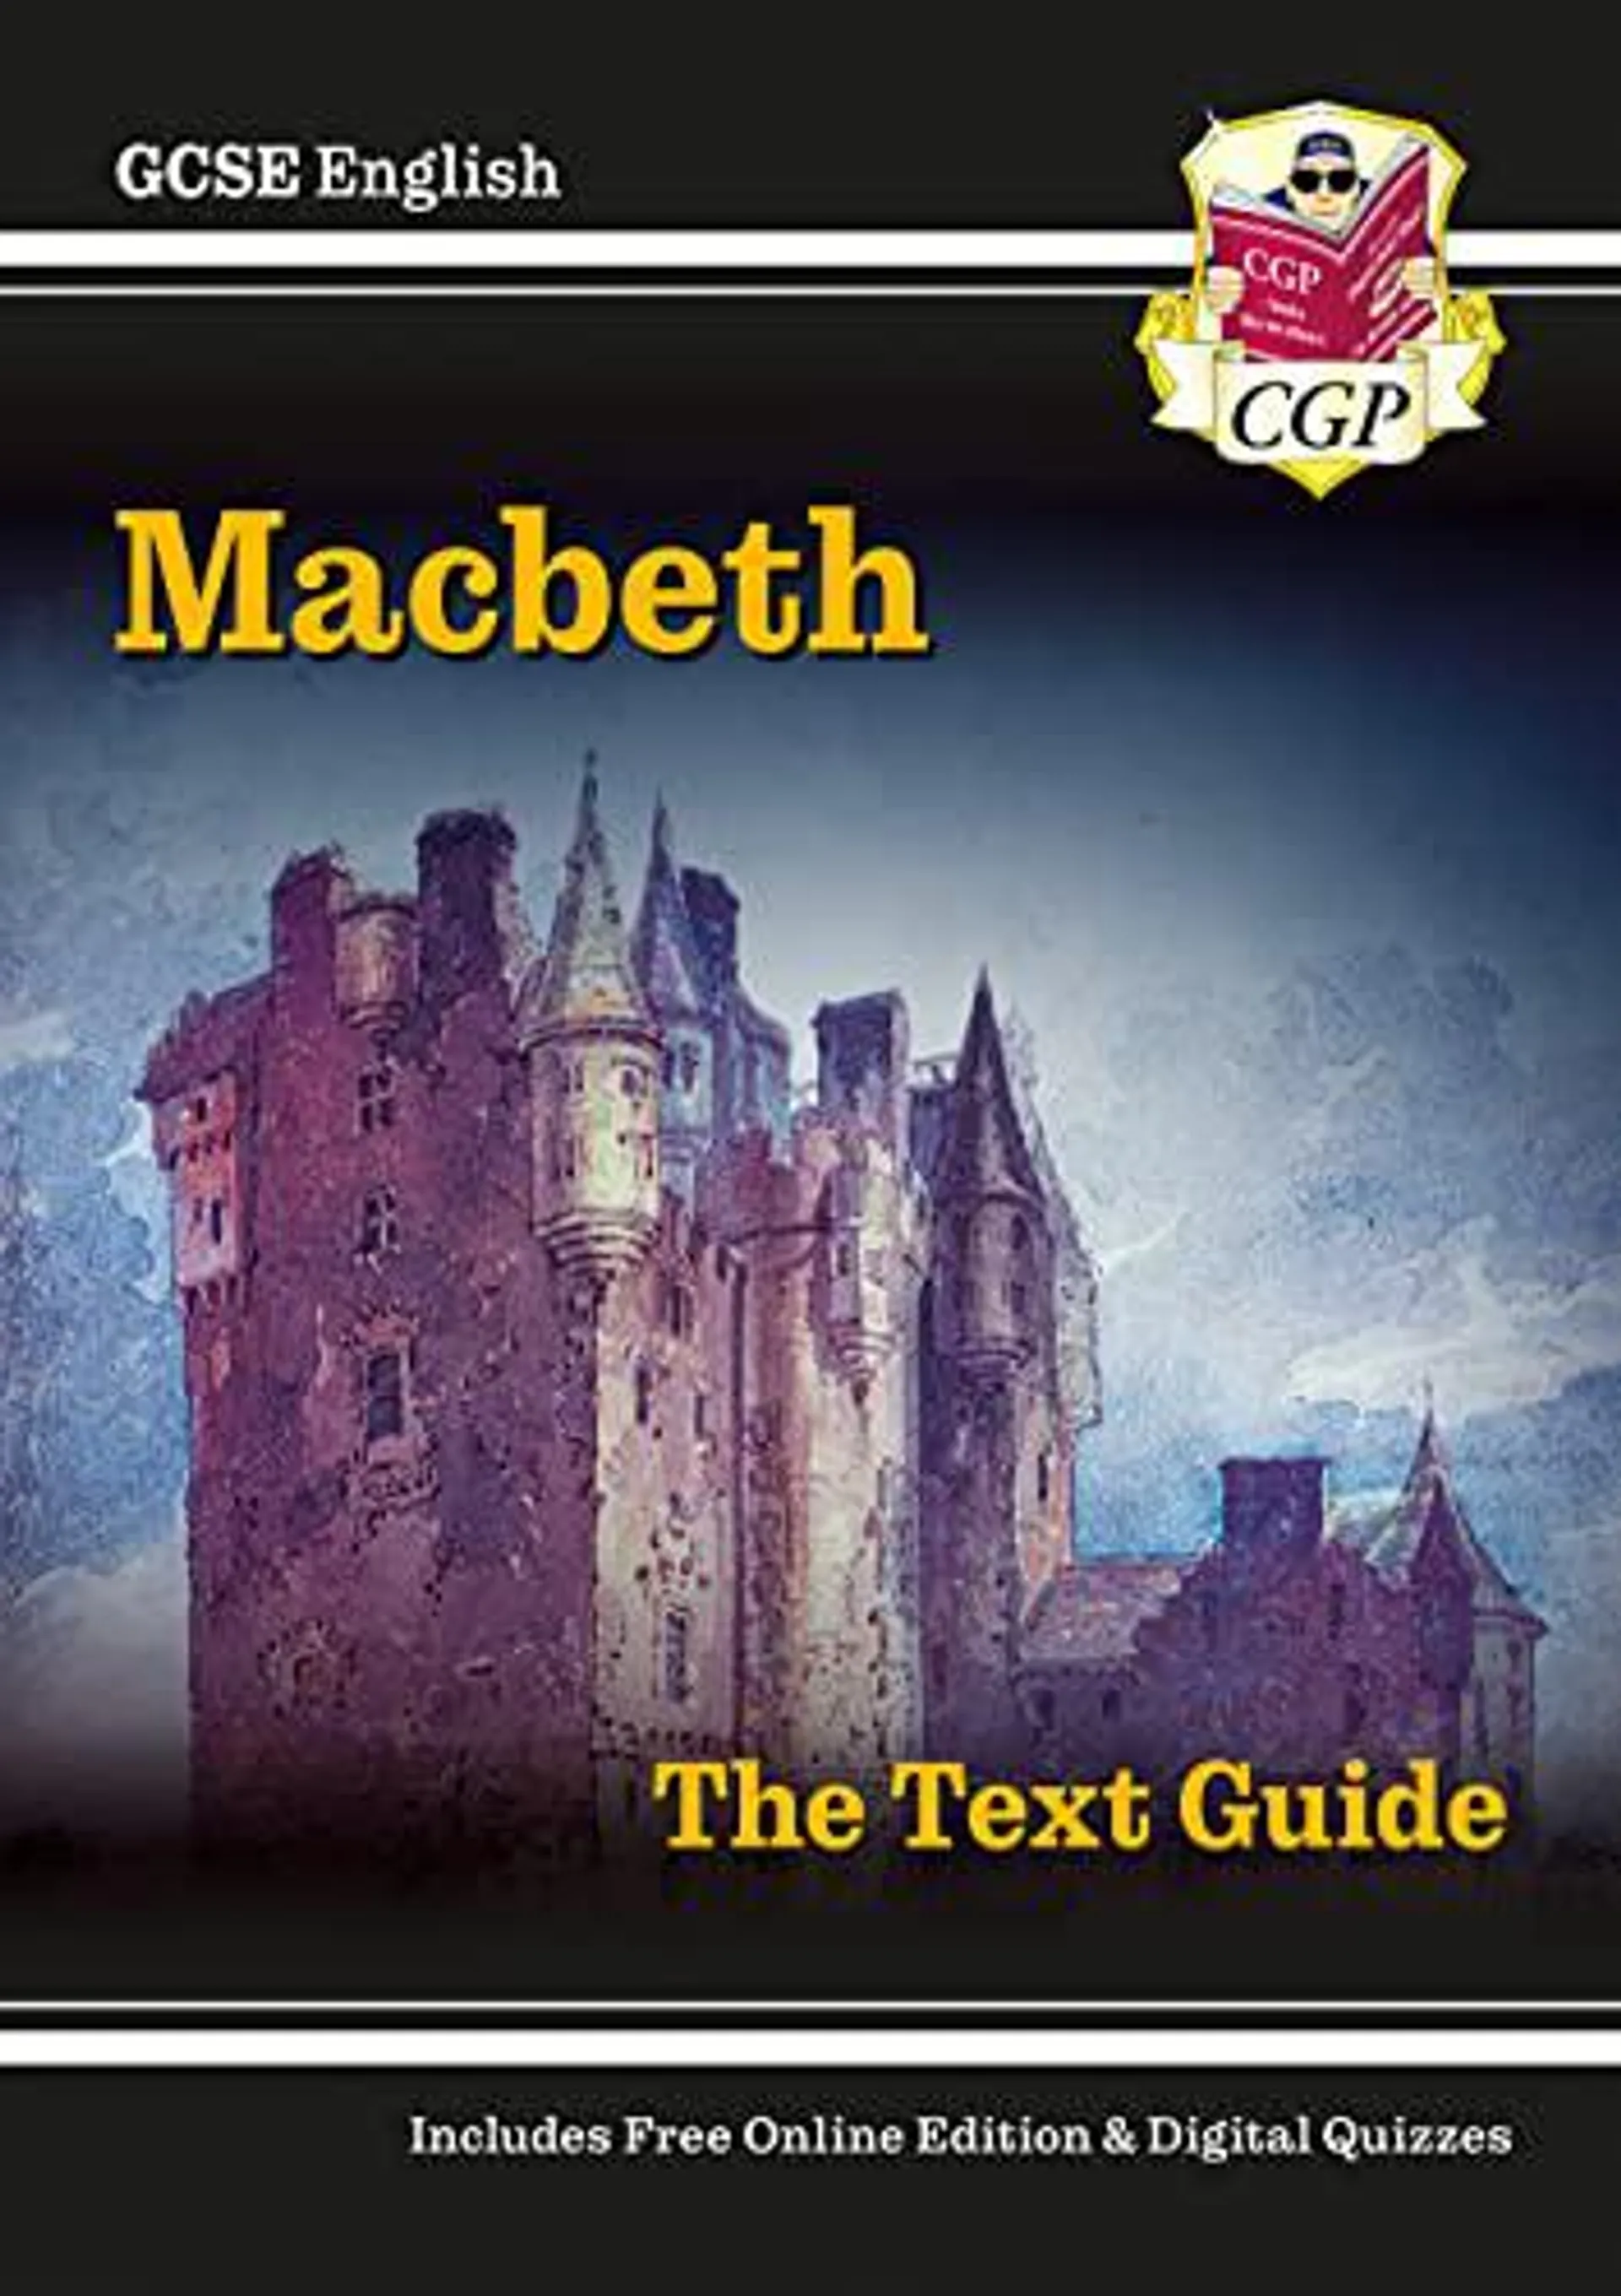 Grade 9-1 GCSE English Shakespeare Text Guide - Macbeth by CGP Books